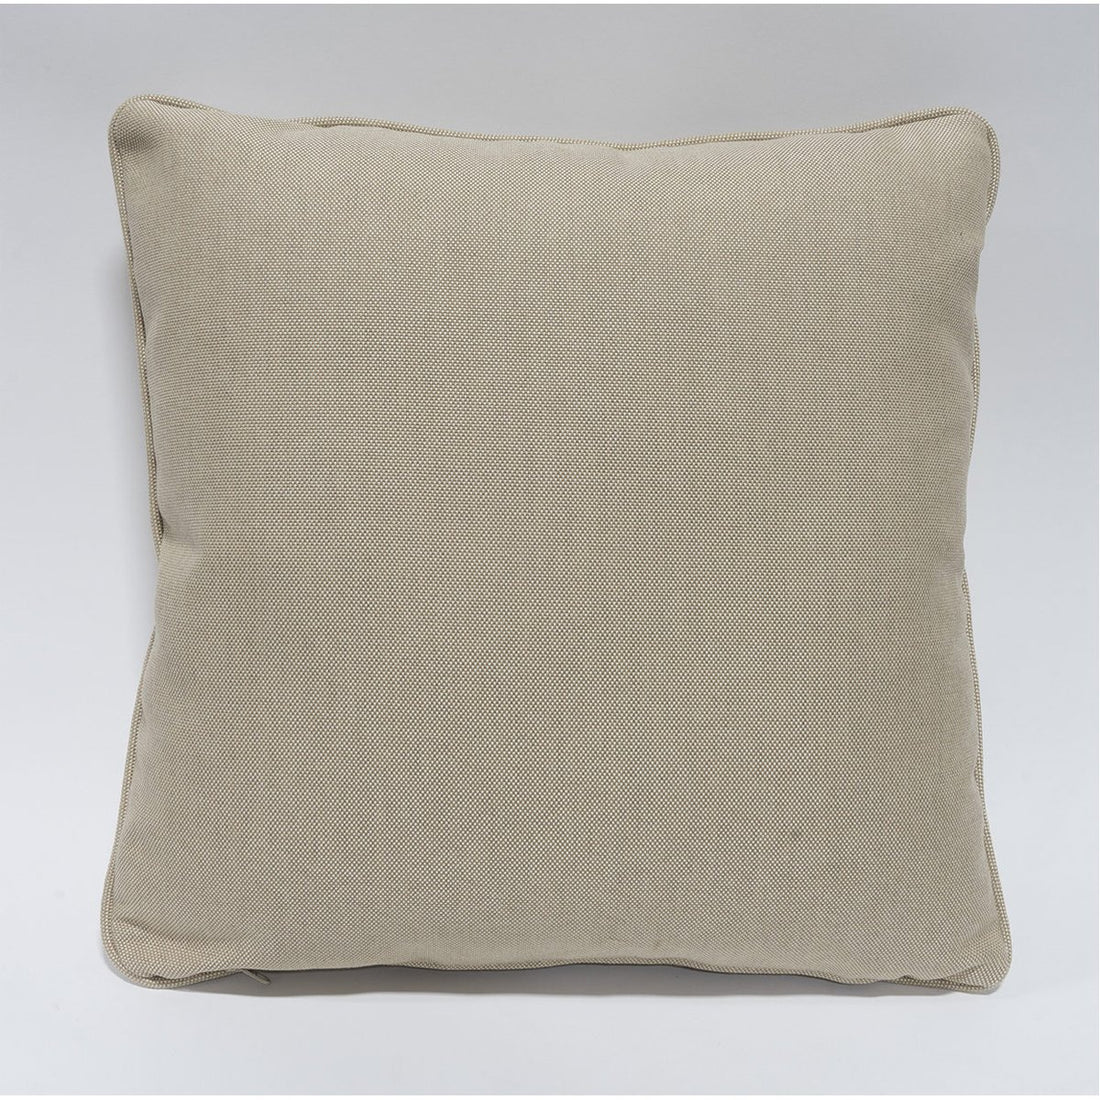 Palecek 20" Square Outdoor Pillow with Welt